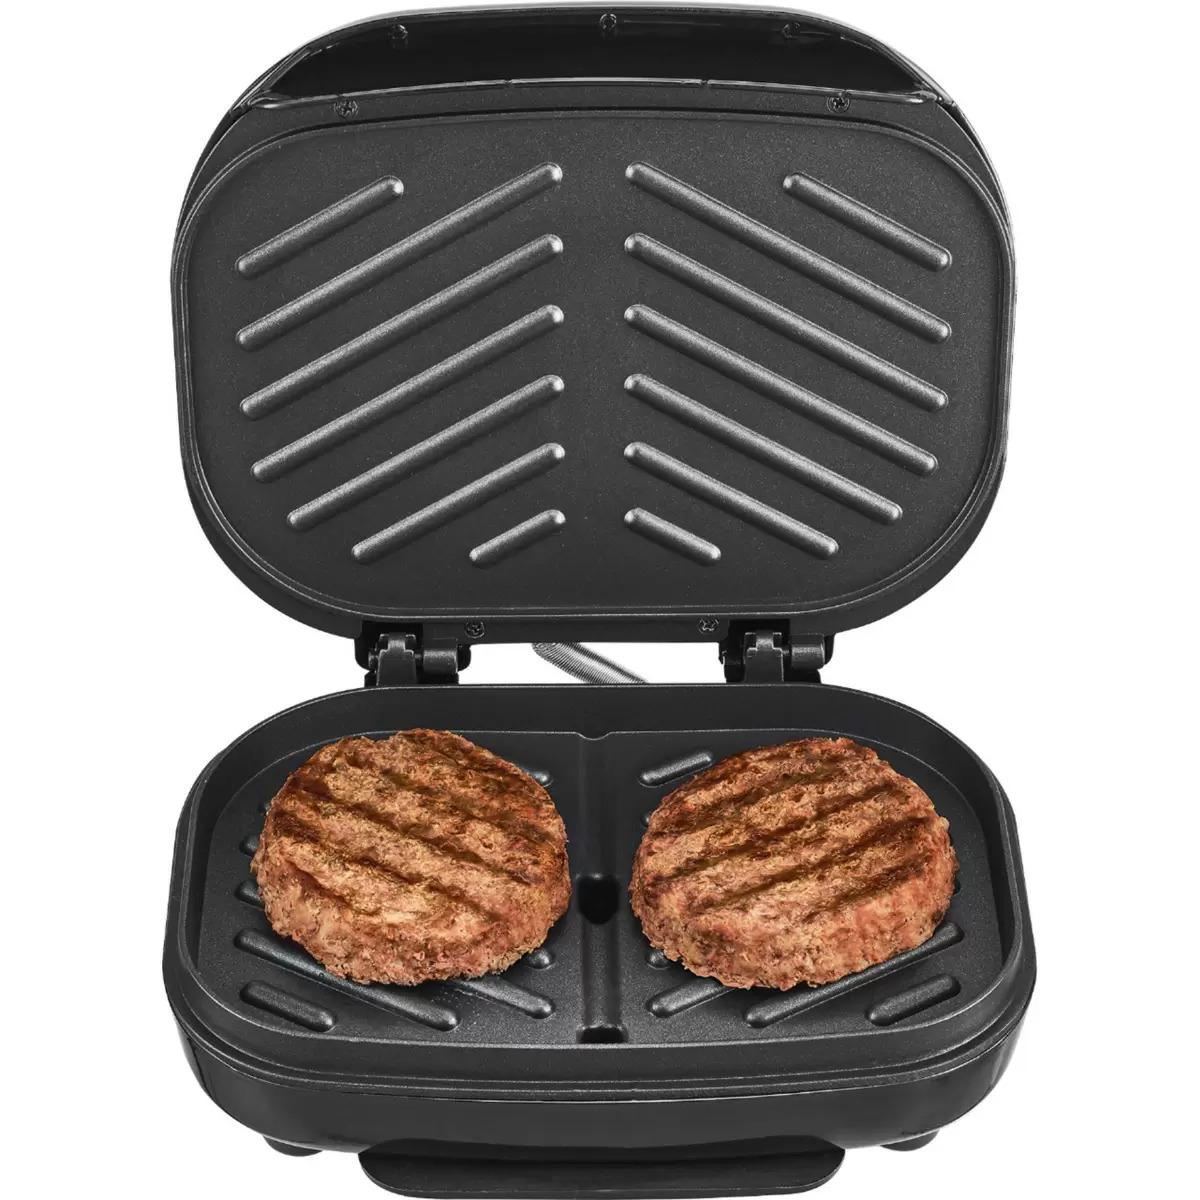 Bella 2-Burger Electric Grill for $7.99